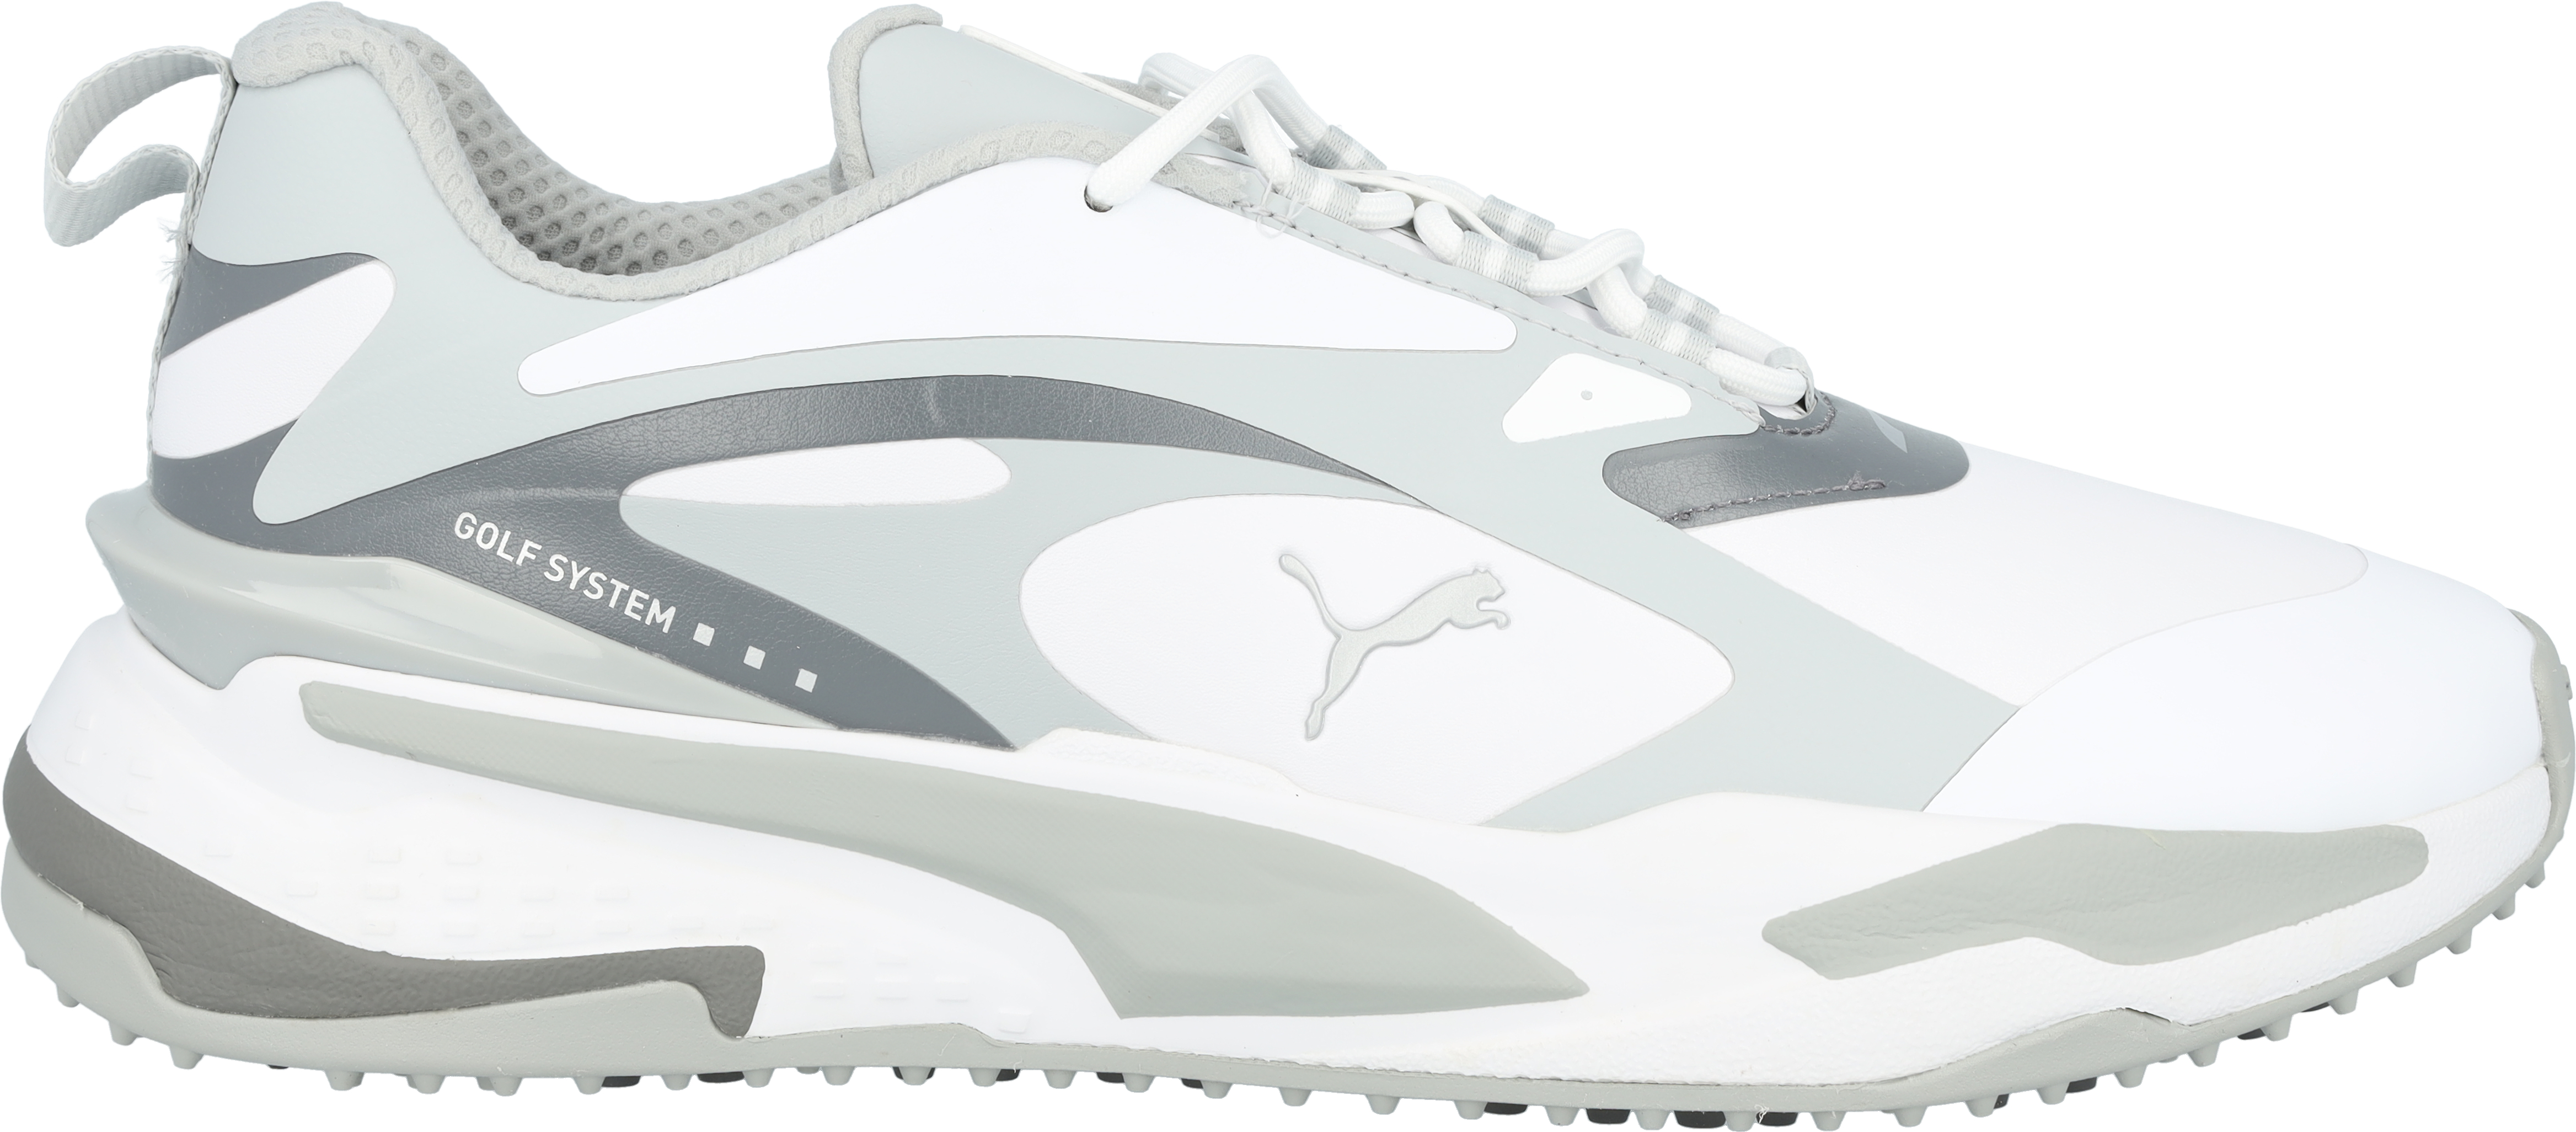 Puma GS Fast 376357-02 Size 11 Medium Spikeless Golf Shoes - image 1 of 1